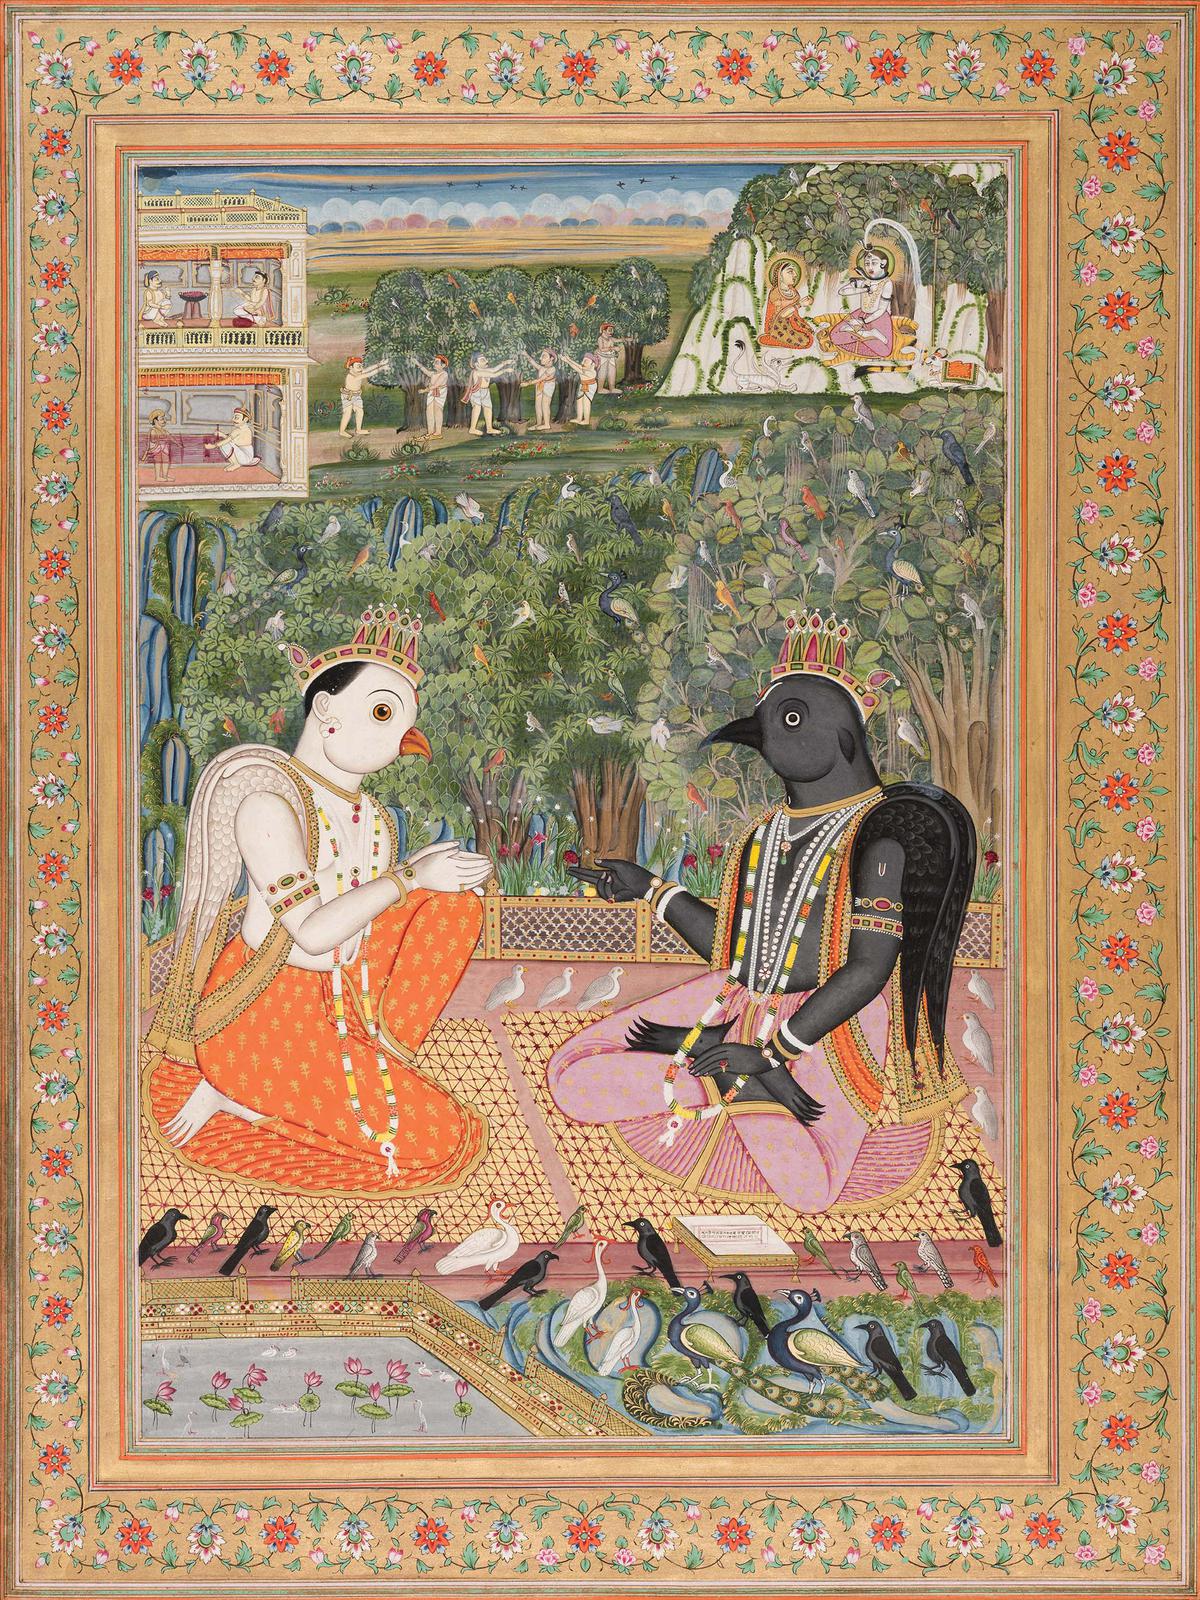 Kaka Bhushundi Narrates His Own Story to Garuda
1814 Style D, Artists from the second wave of migrations from Jaipur, perhaps assisted by local painters.